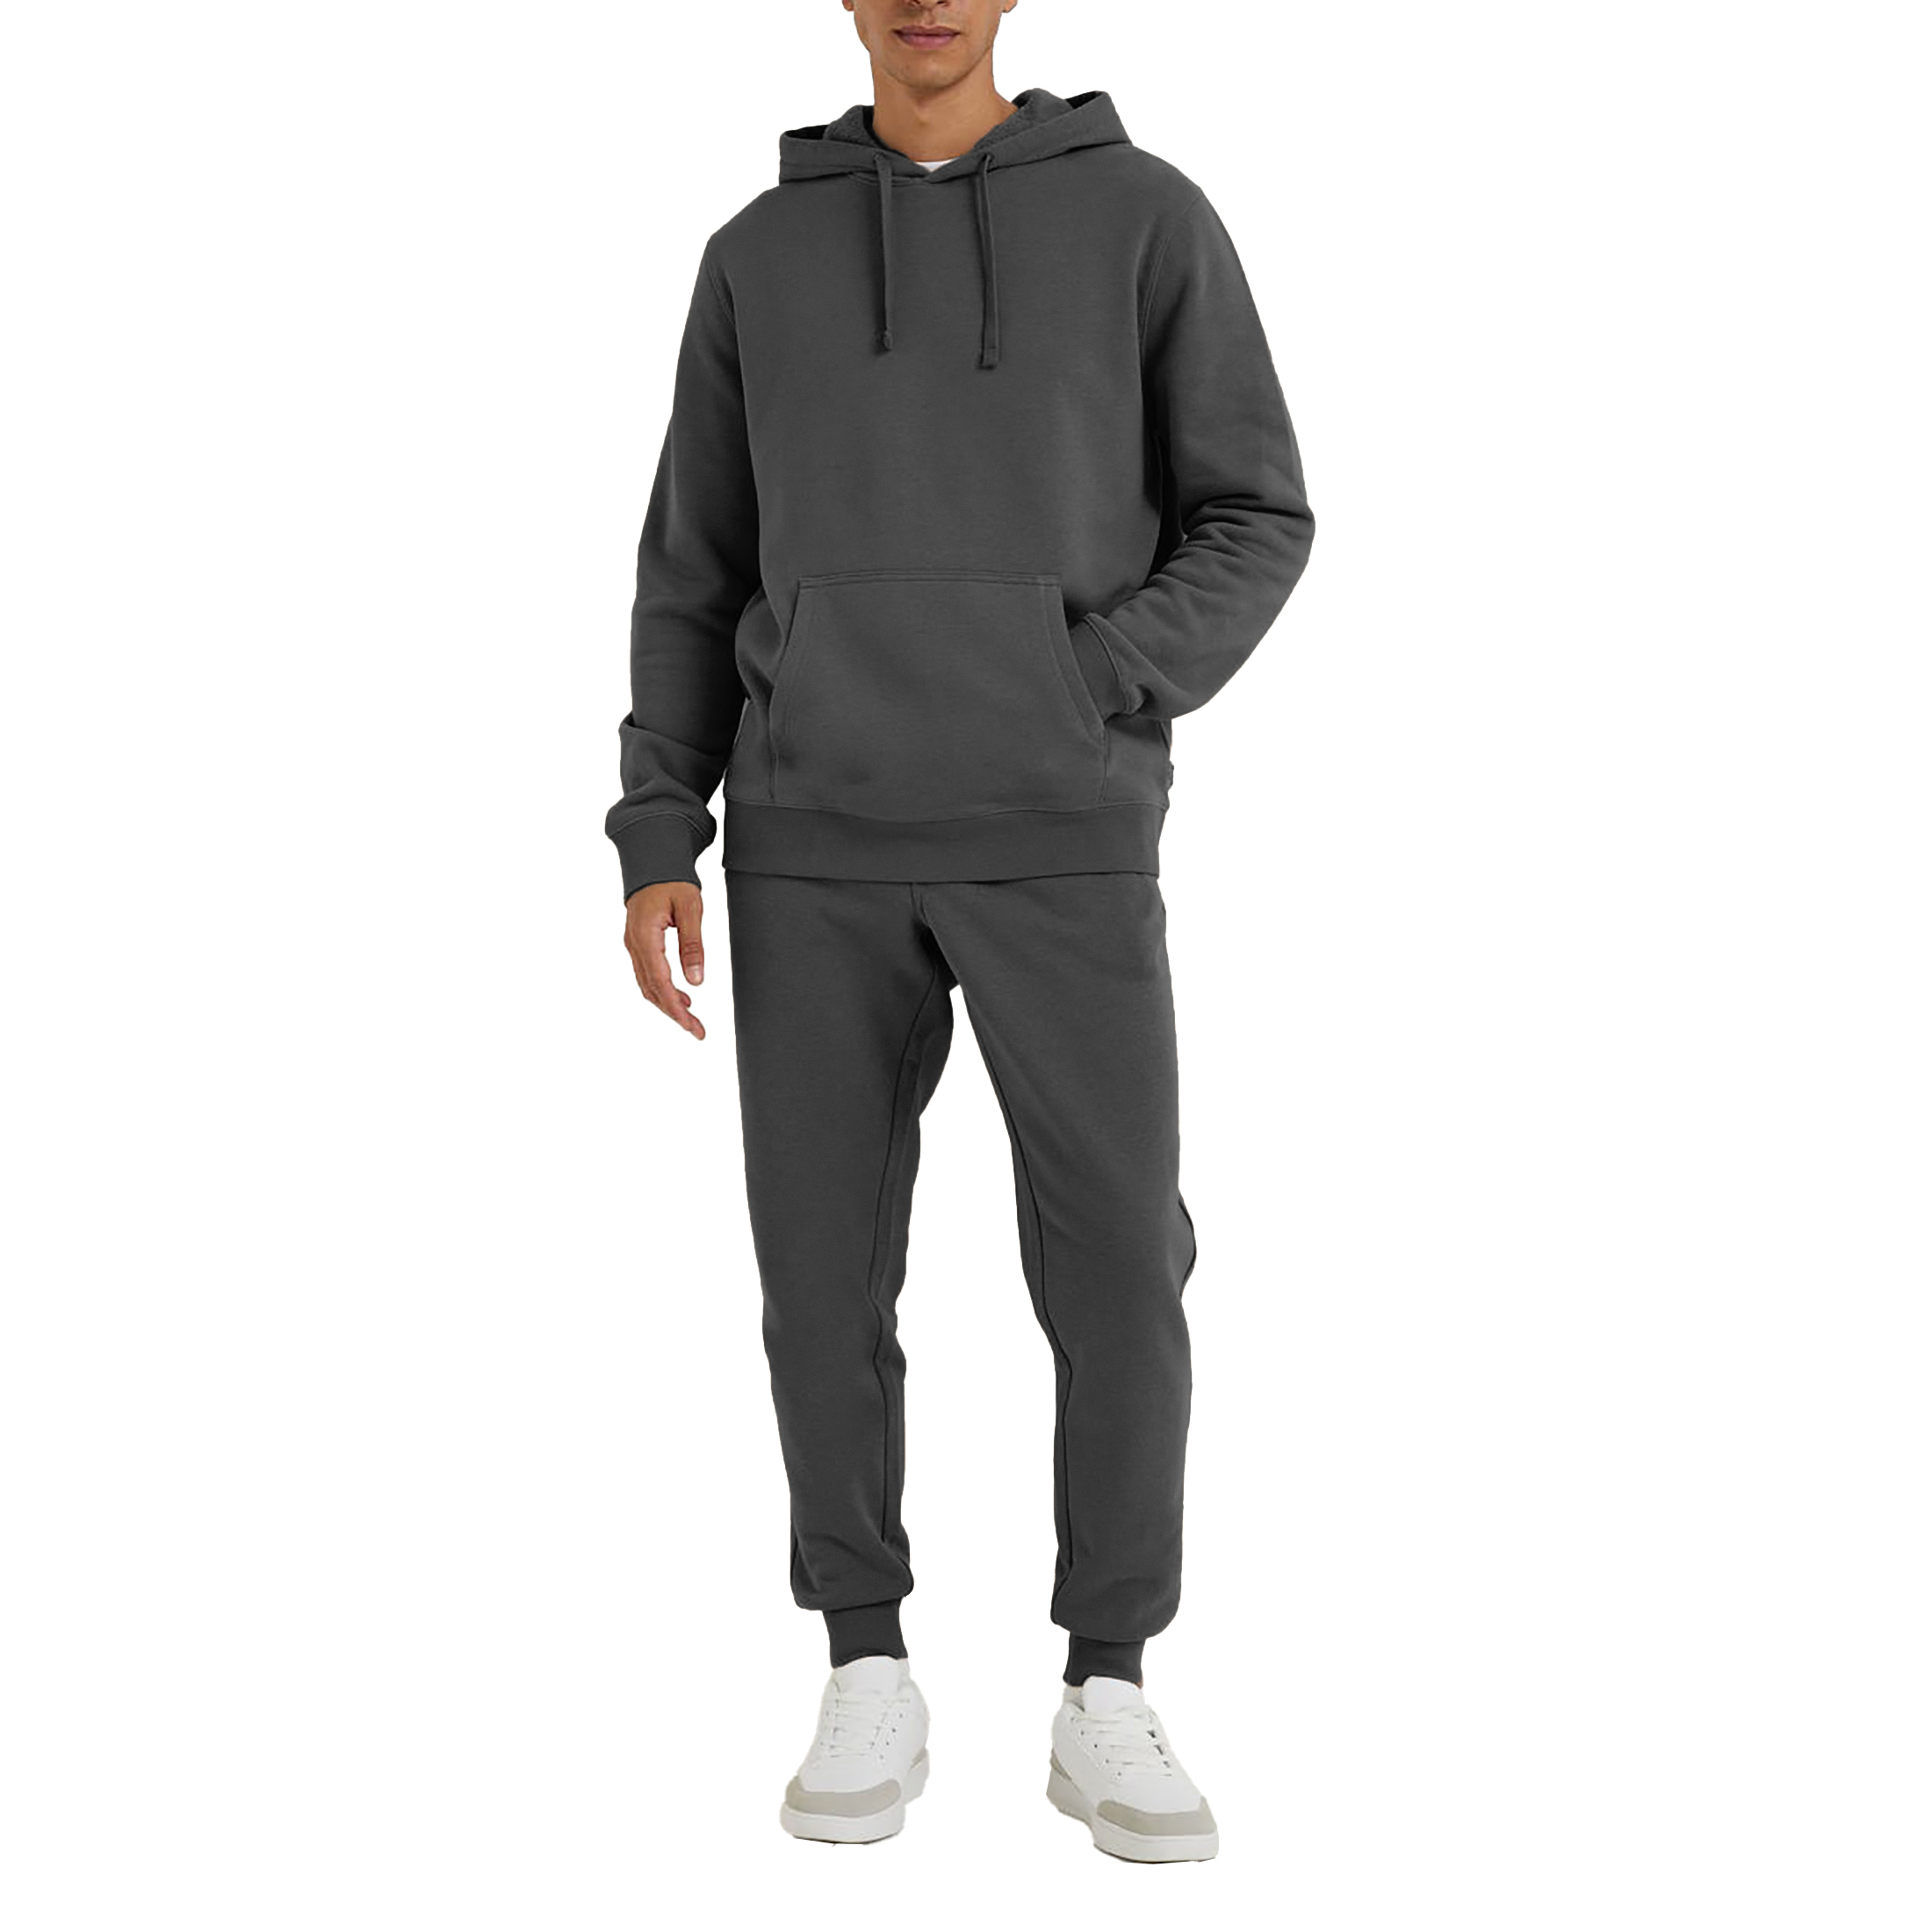 Men's Athletic Warm Jogging Pullover Active Tracksuit - Charcoal, X-Large